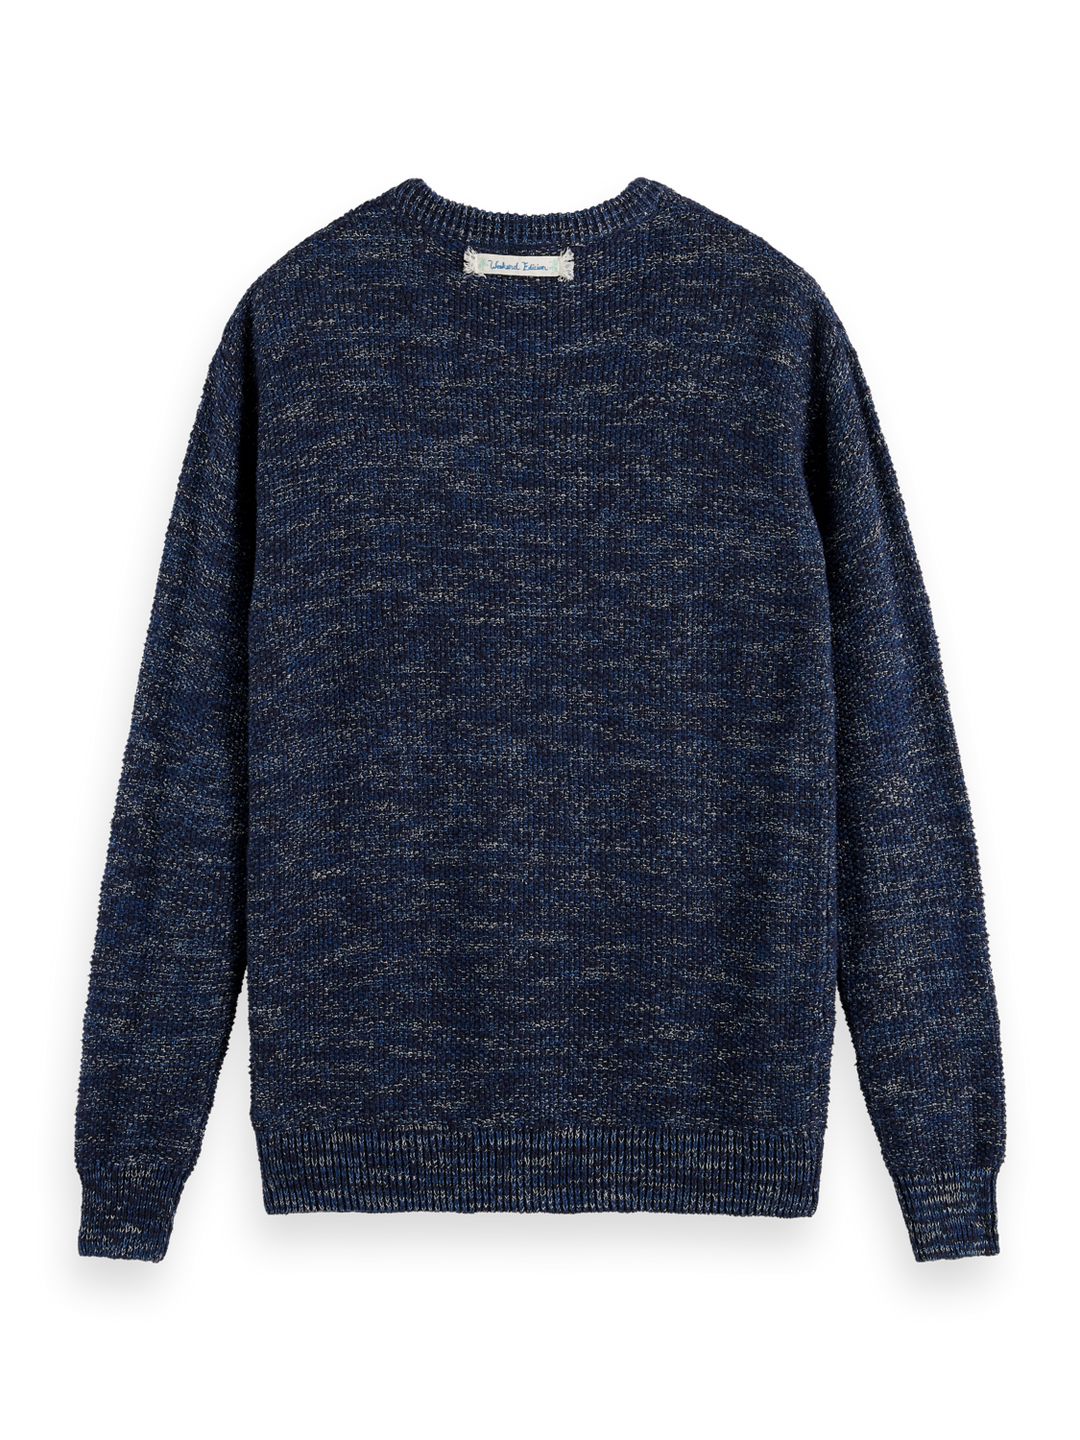 Space-Dyed Melange Crewneck Sweater Combo B 0218 | Buster McGee